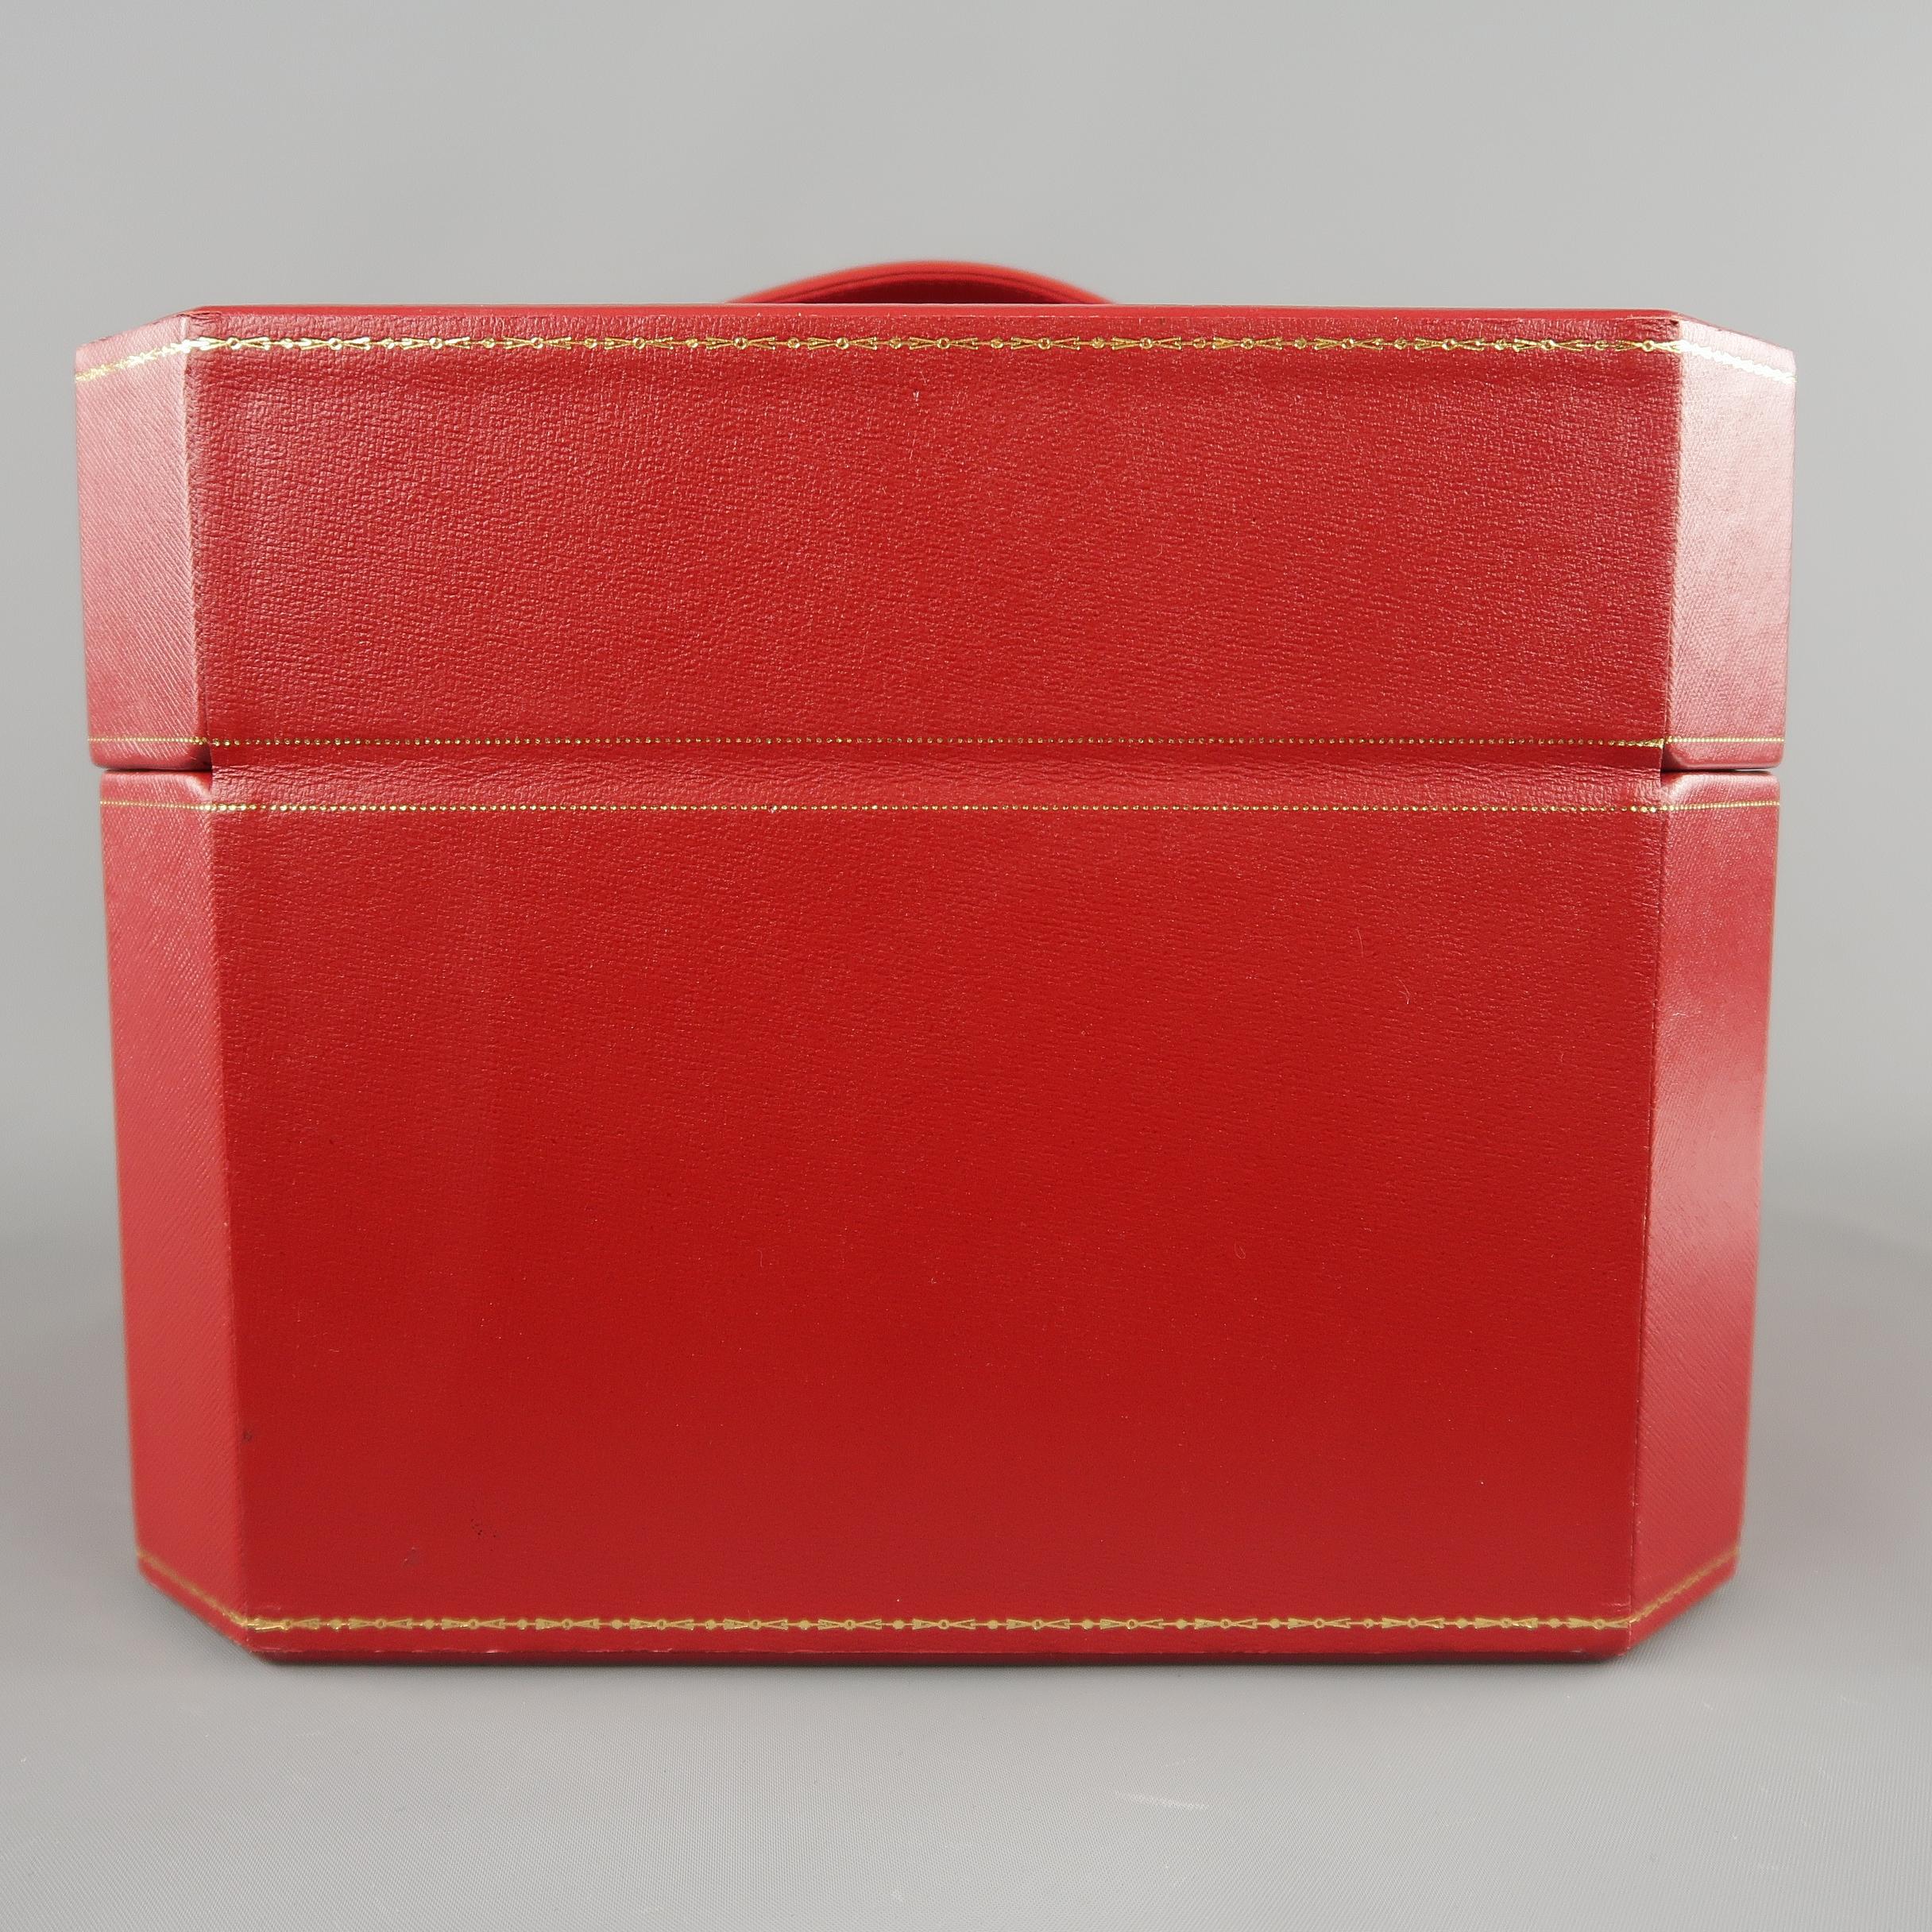 Vintage CARTIER Red Watch & Jewelry Storage Box with Drawer Compartments 6